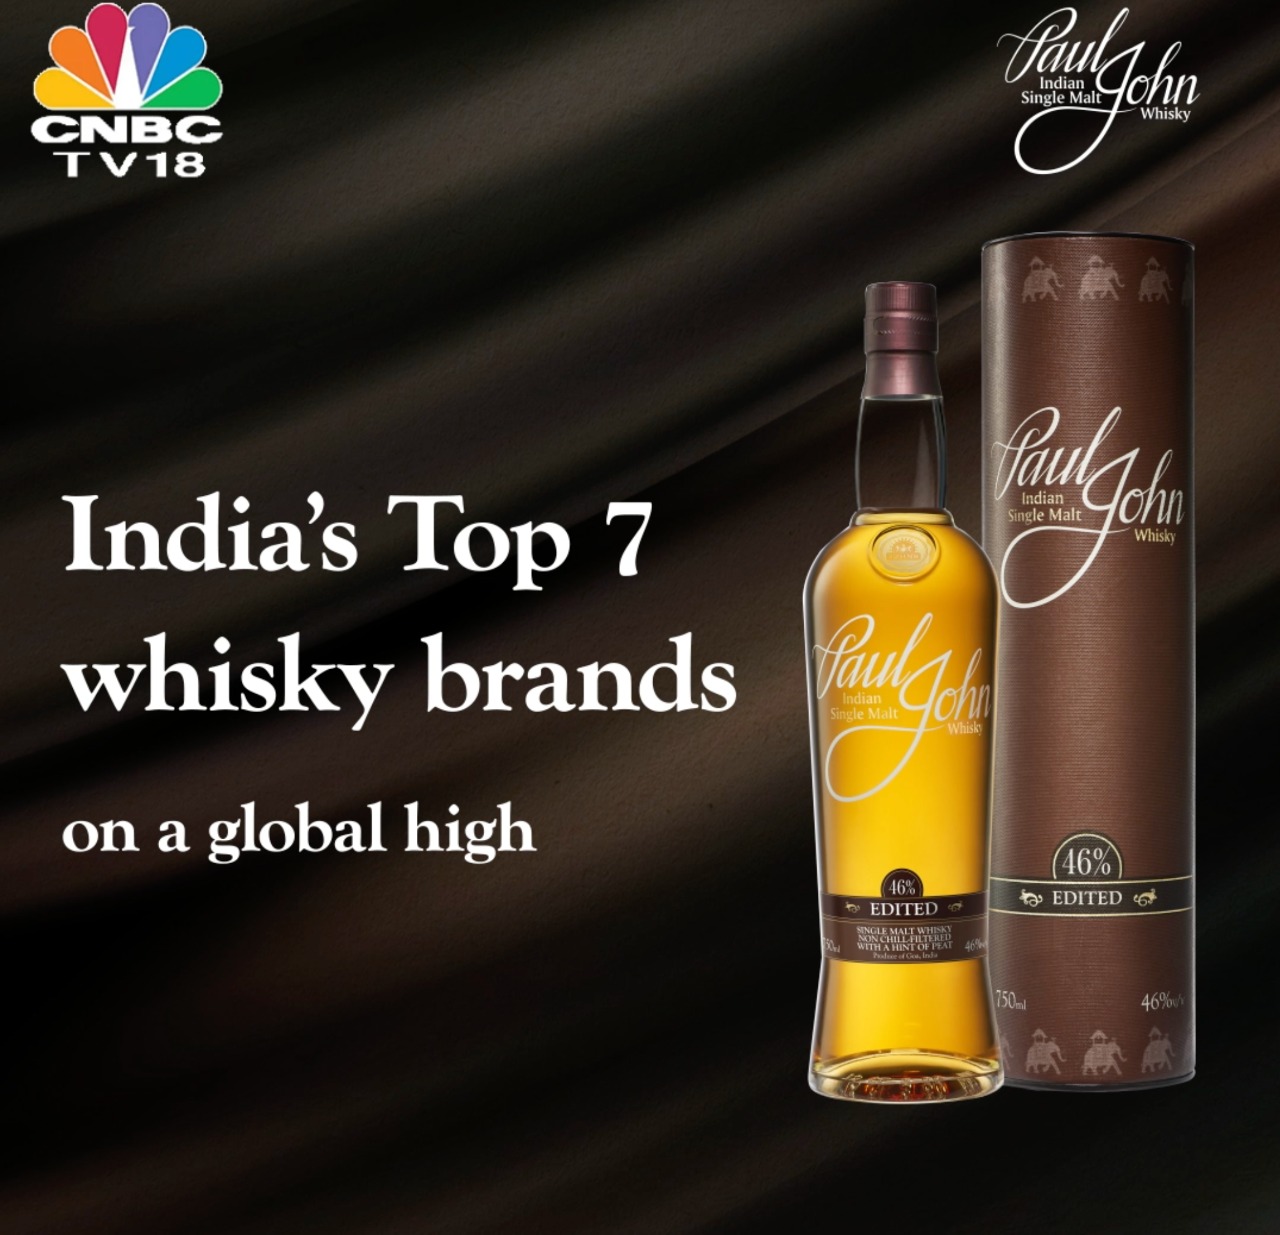 From Single Malts to Blends, Here are India's Top 7 Whisky Brands on a Global High